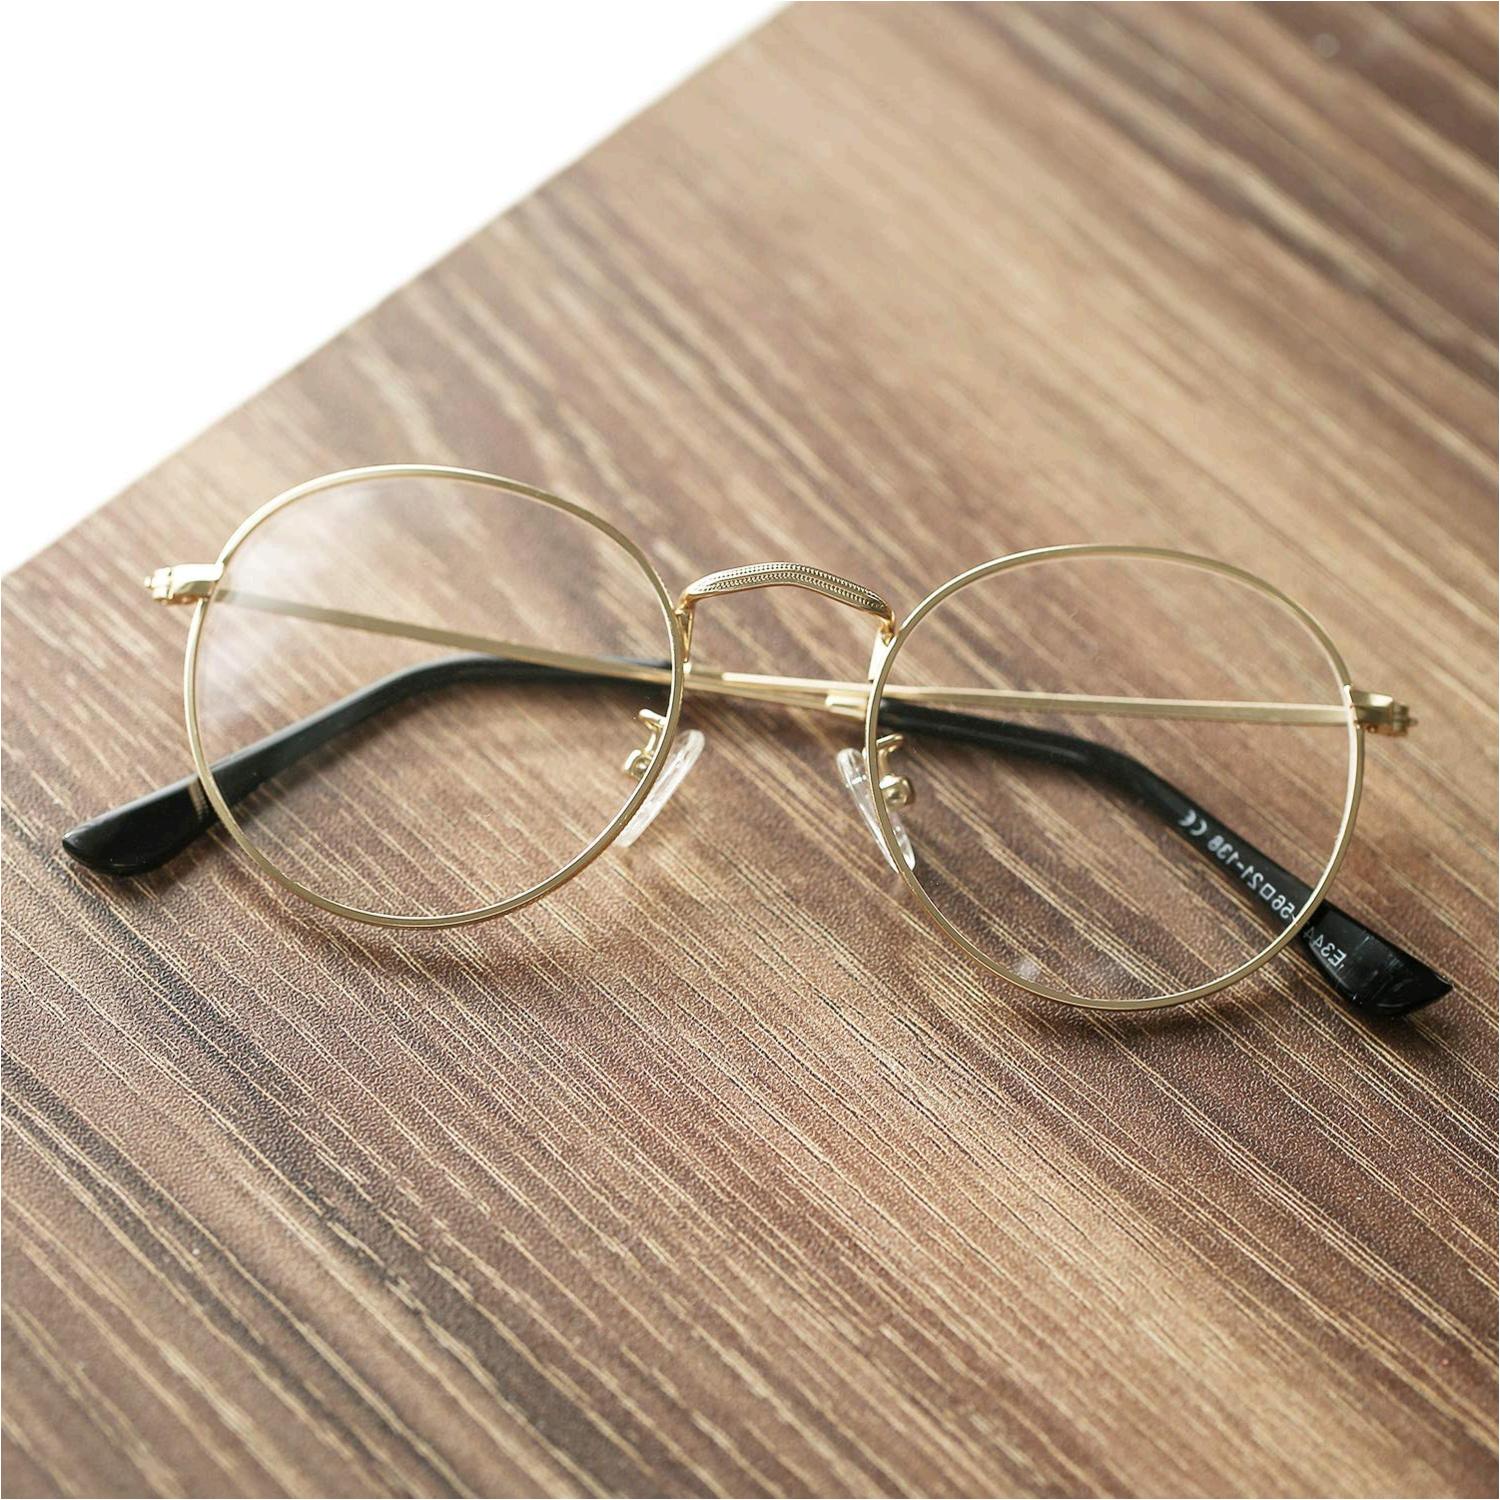 Pro Acme Classic Round Metal Clear Lens Glasses Frame Unisex Gold